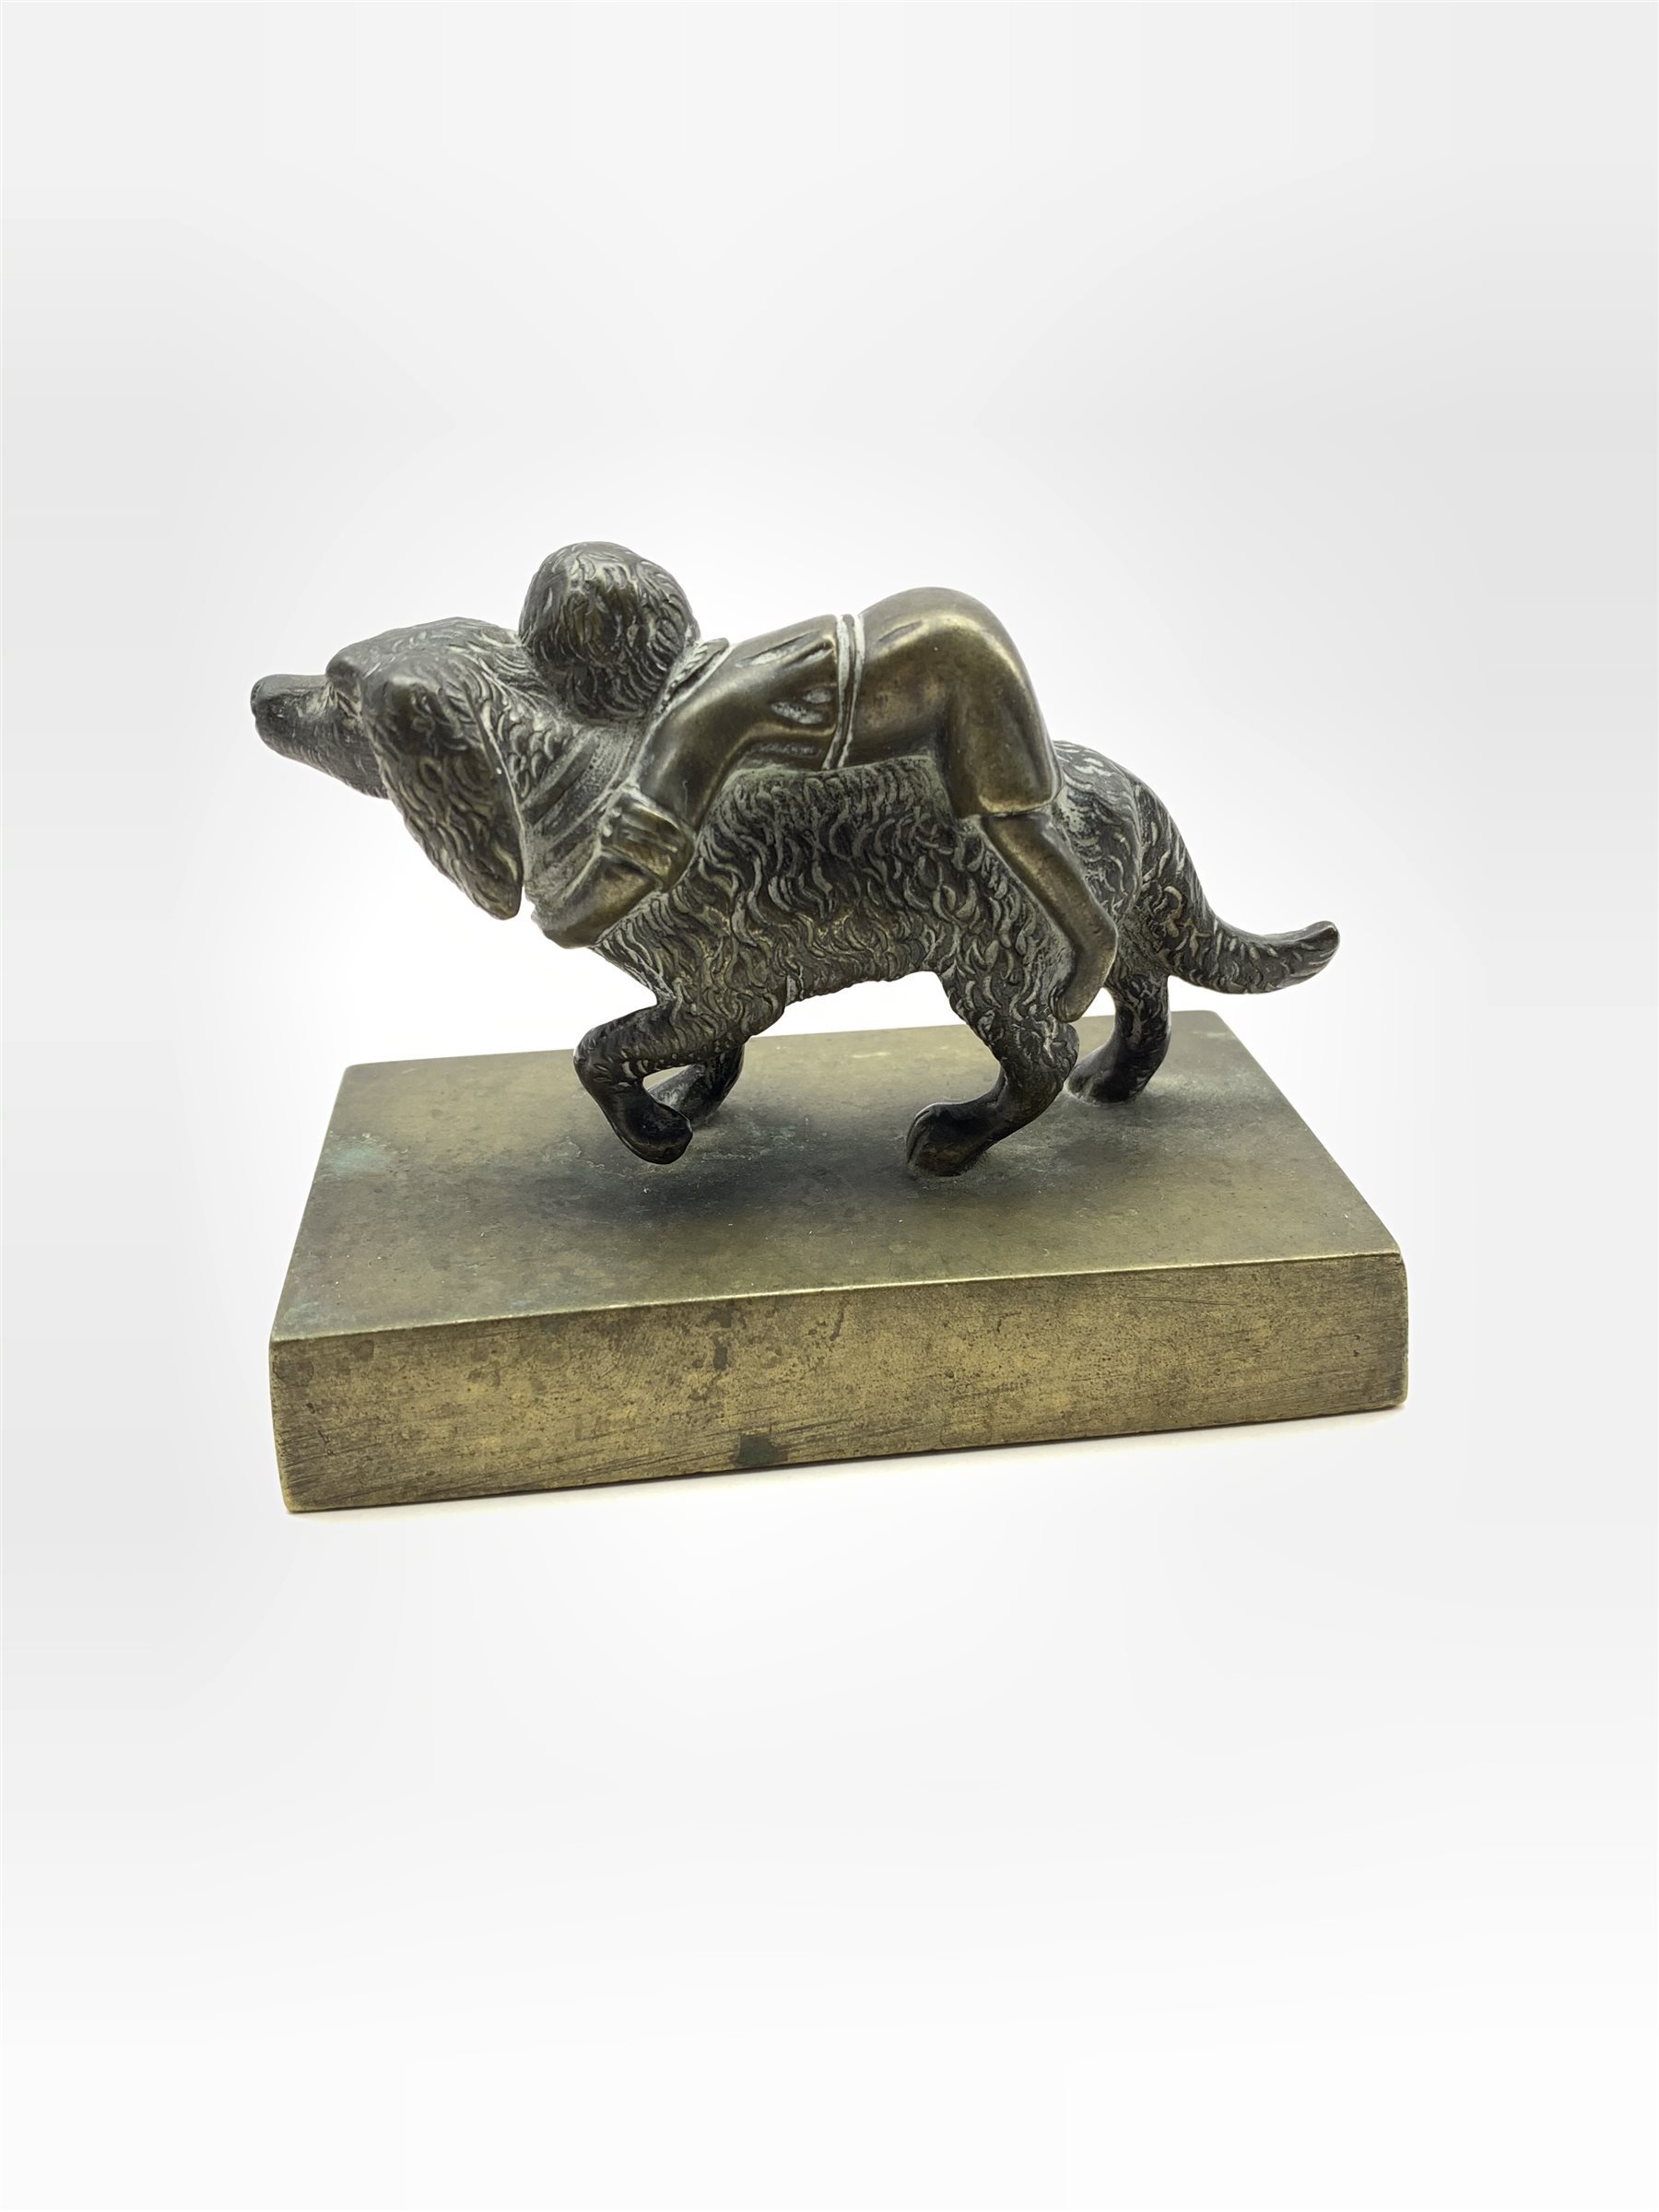 19th/ early 20th century patinated bronze sculpture of a girl and dog on rectangular base, L9.5cm - Image 2 of 3